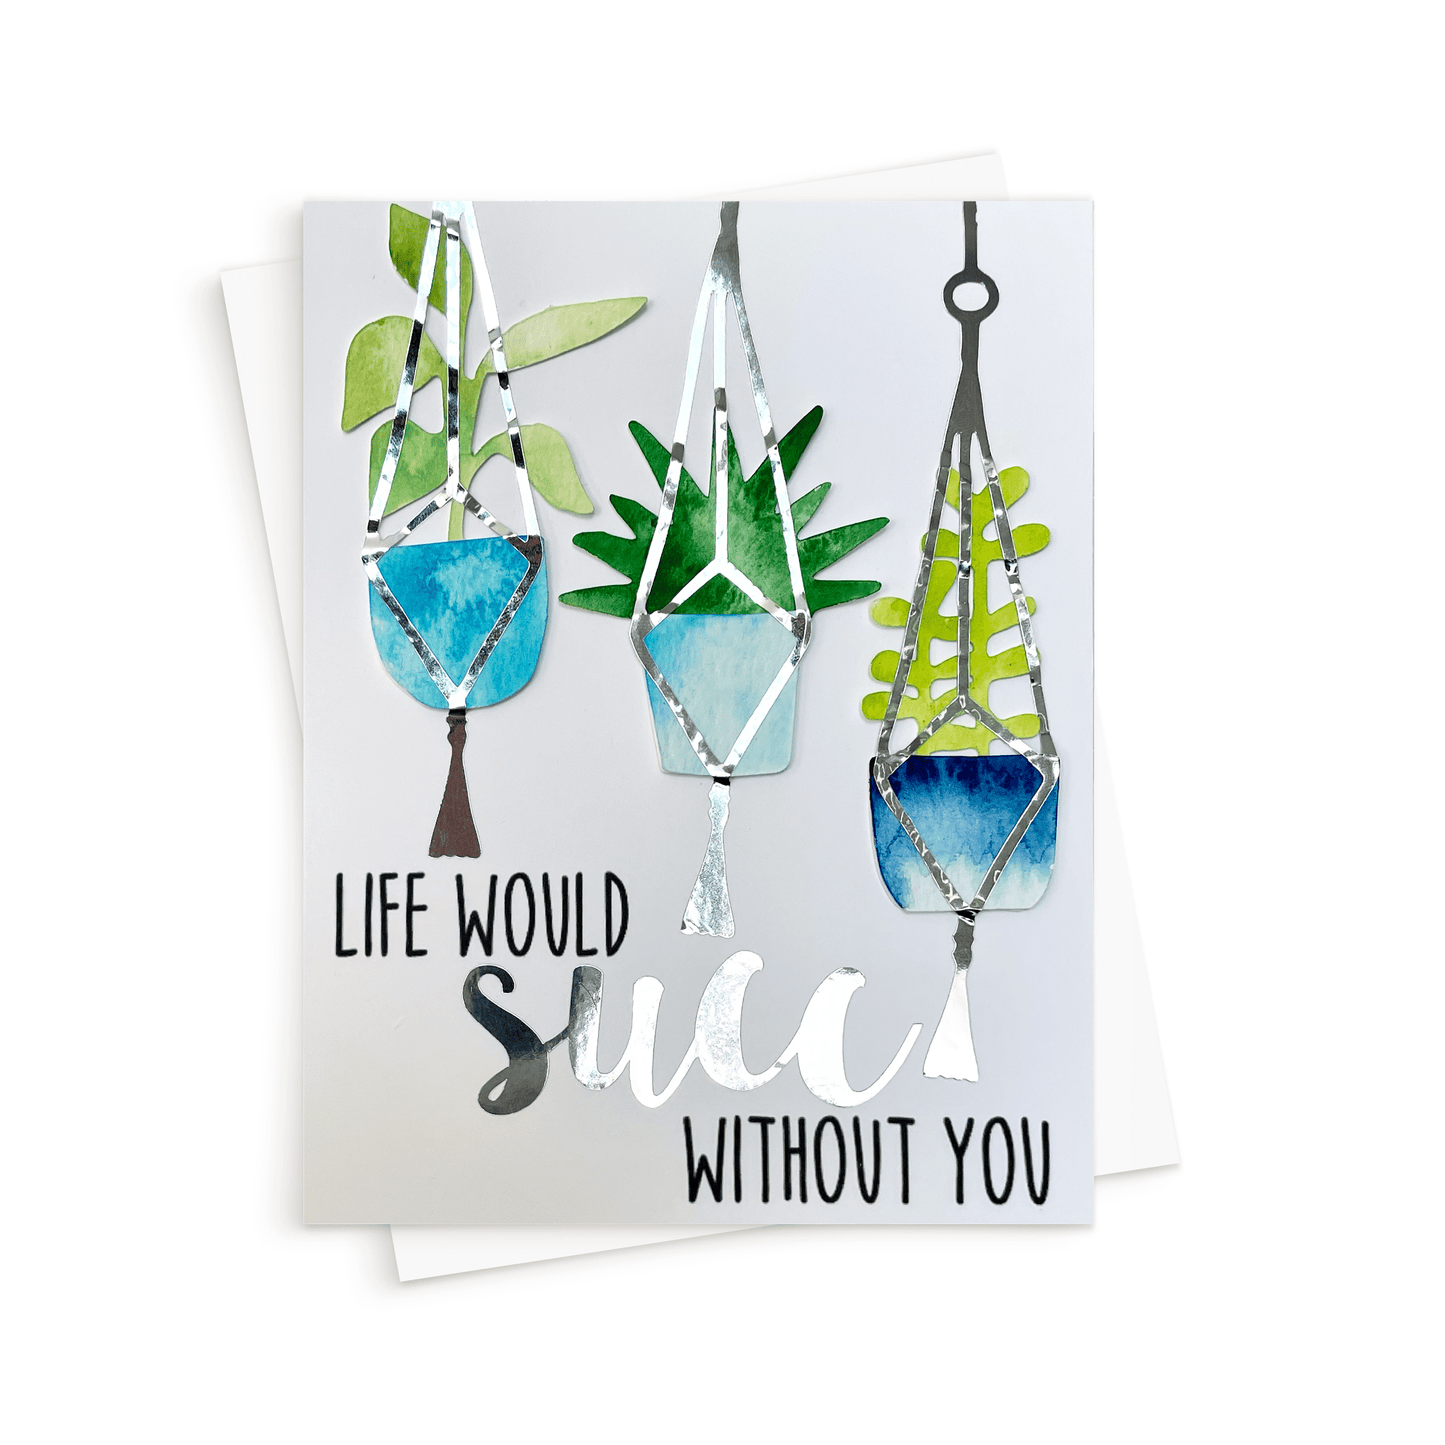 The Life Would Succ Without You Card. Handmade custom card.